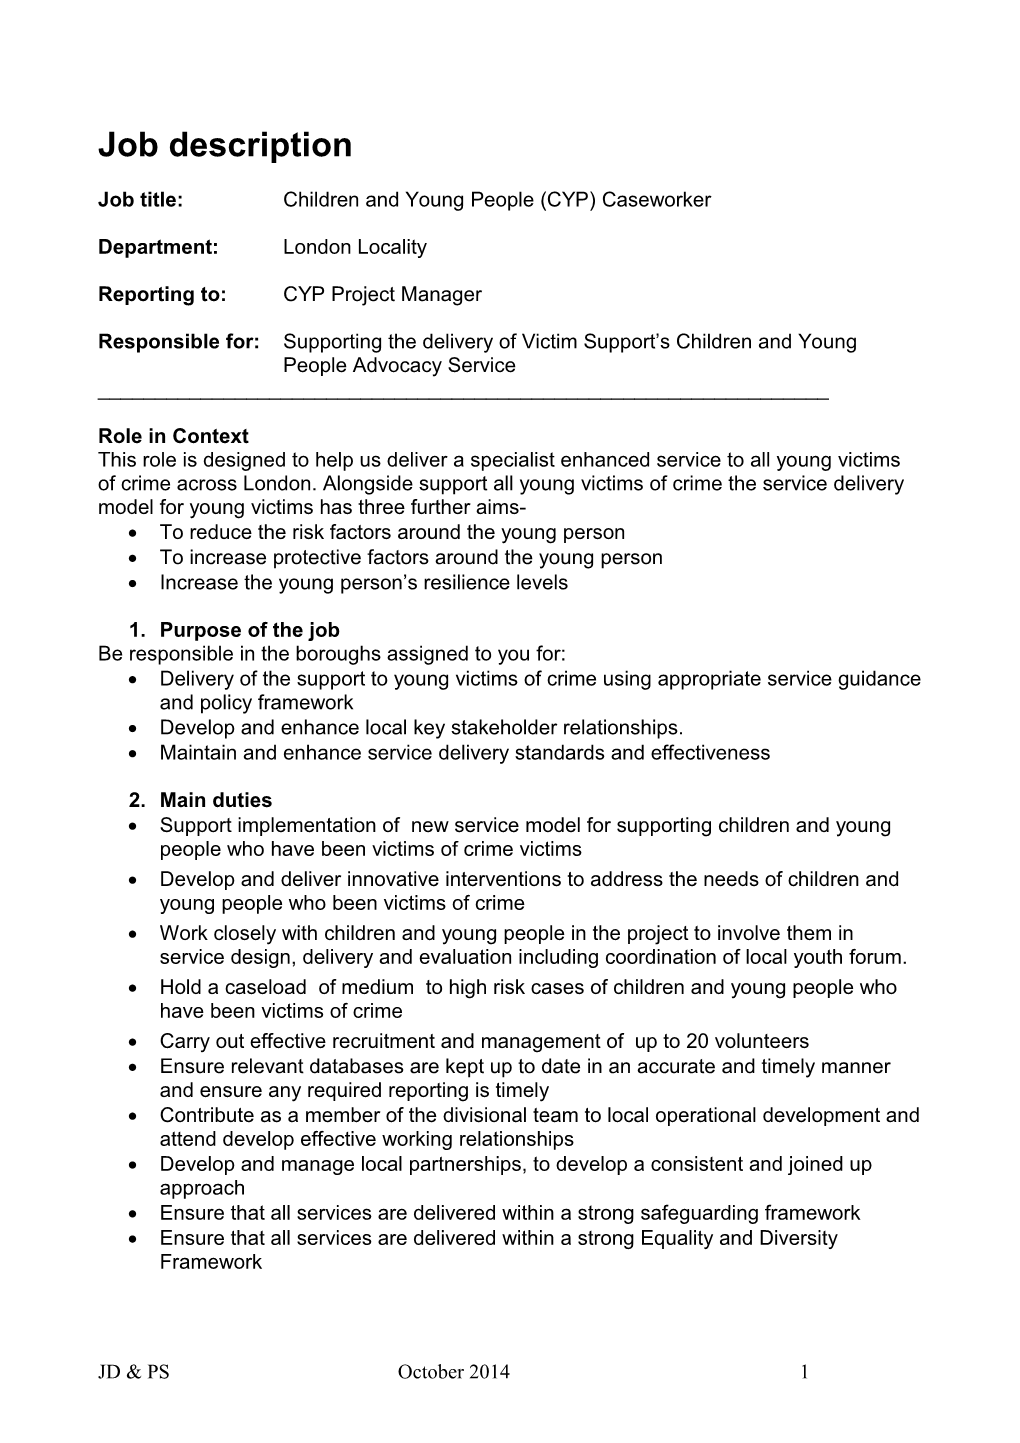 Job Title:Children and Young People (CYP) Caseworker